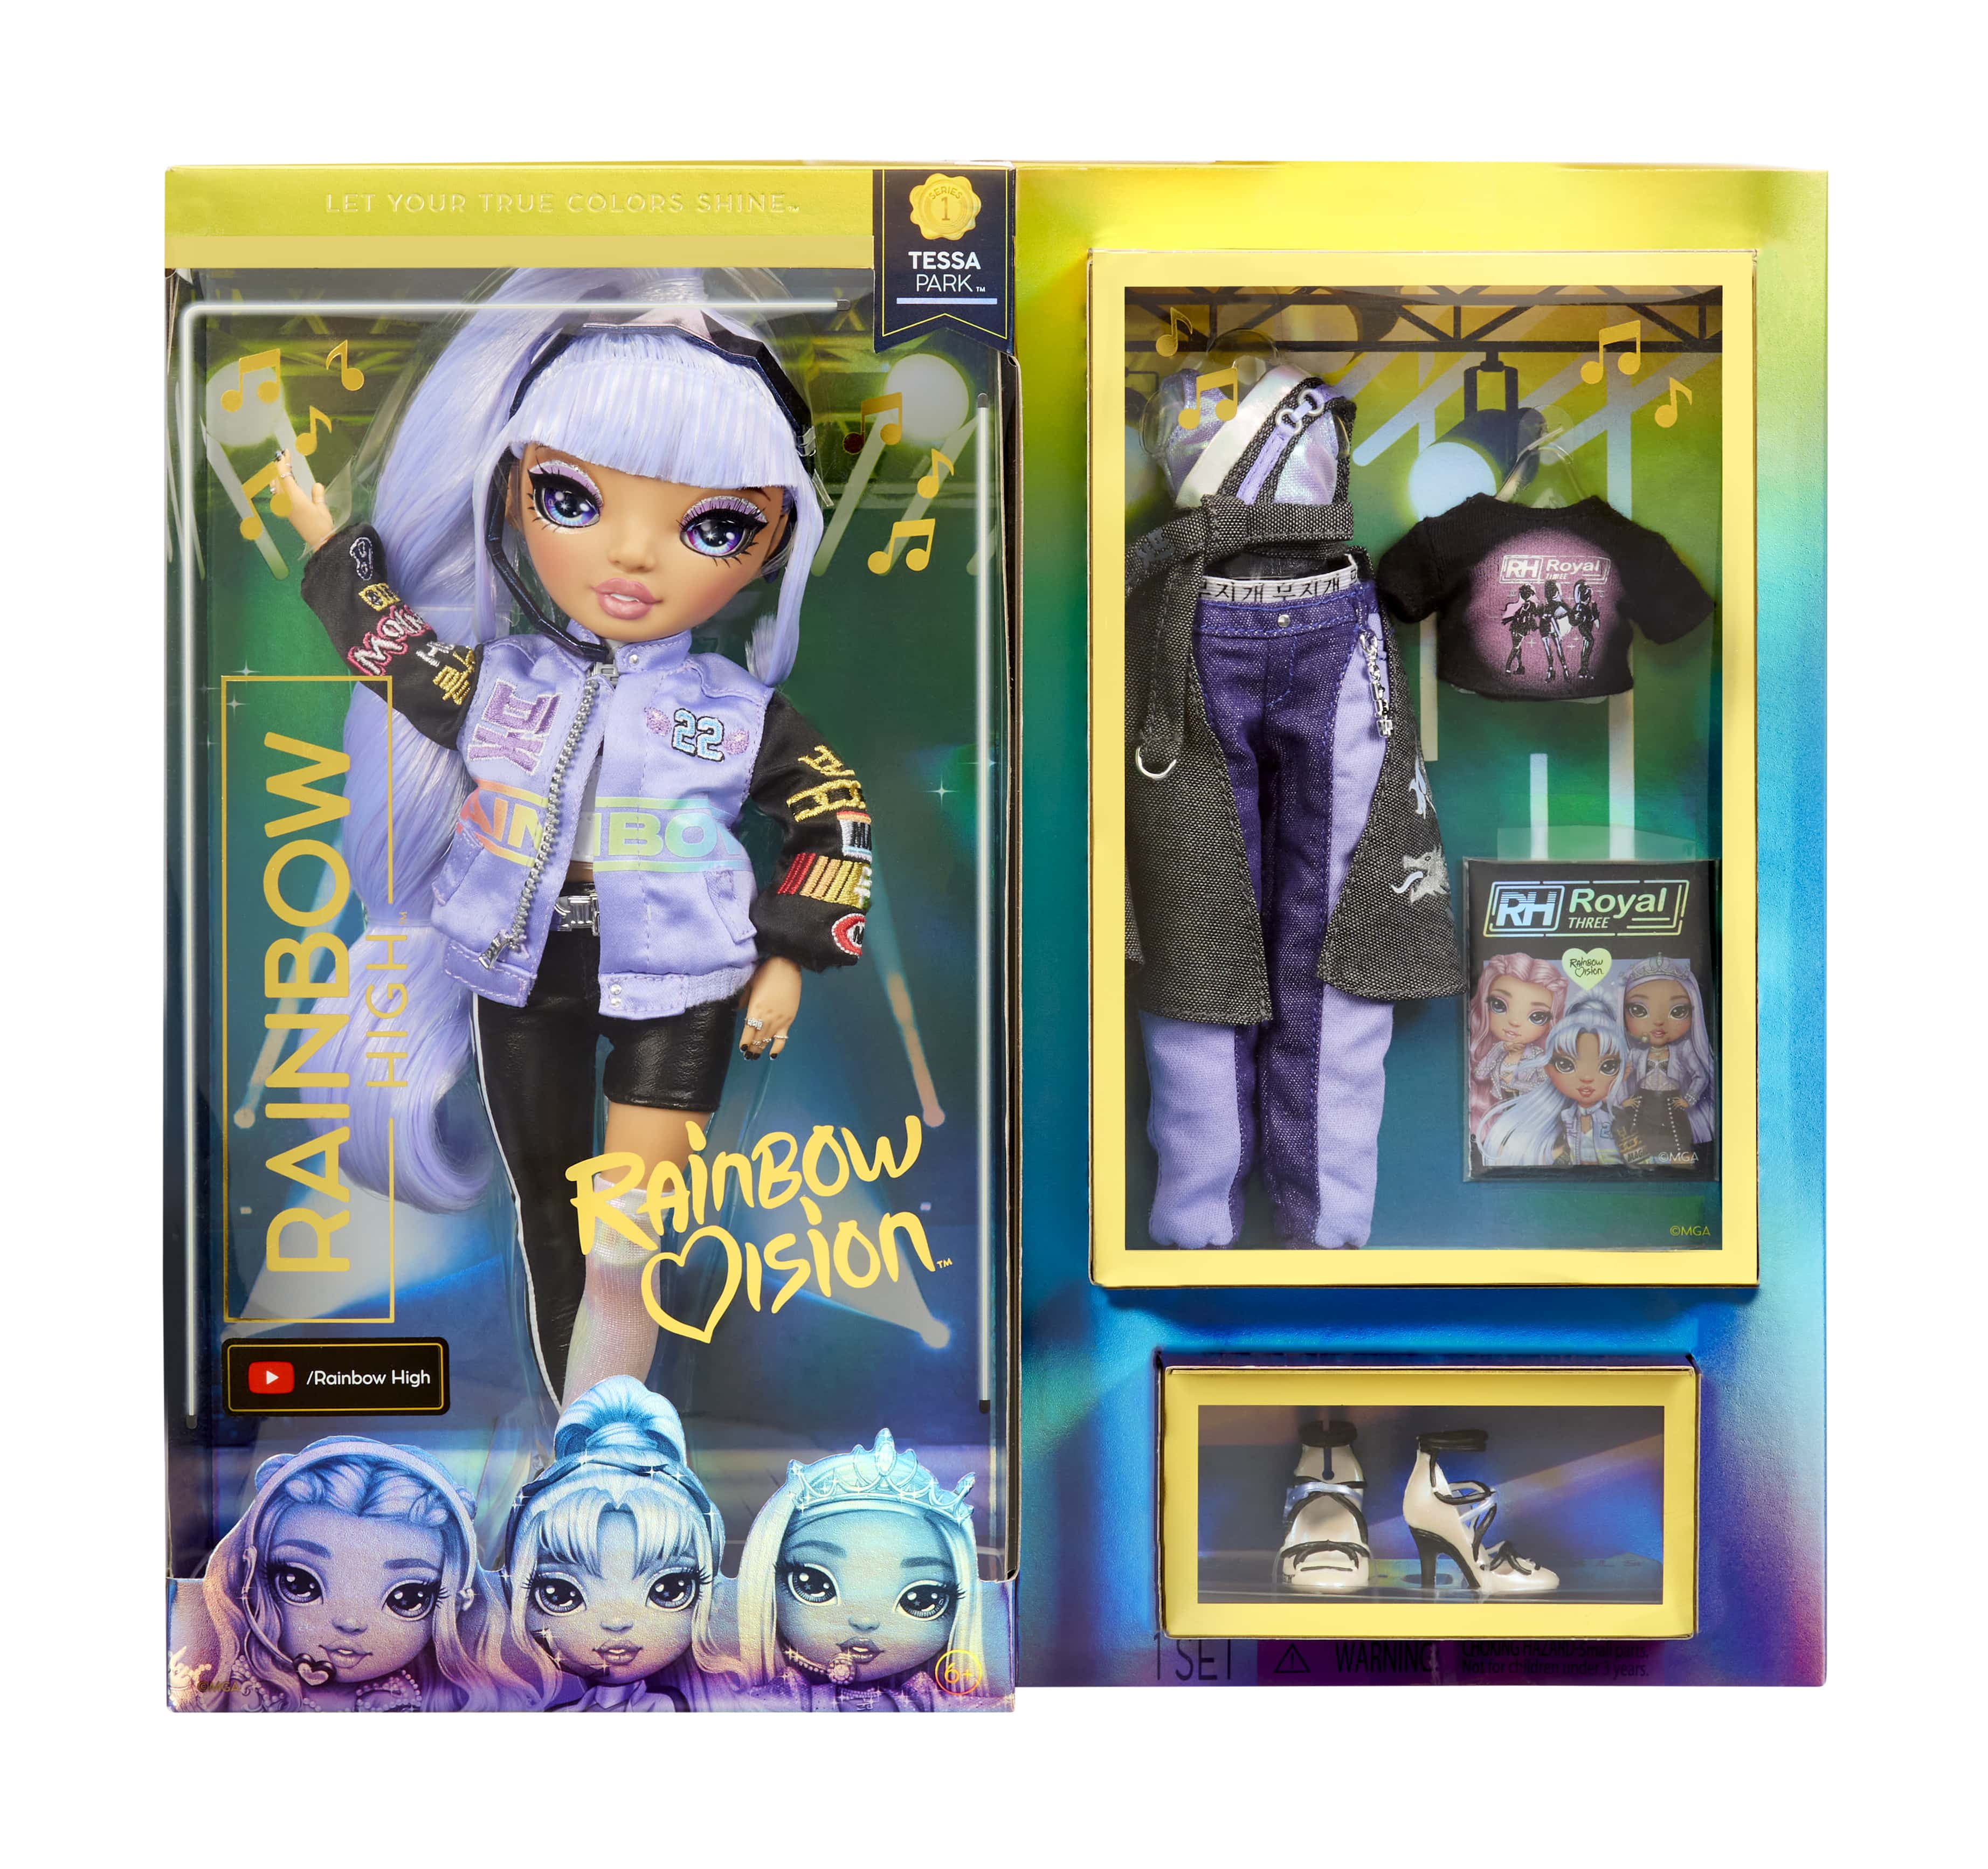 Rainbow High Rainbow Vision Royal Three K-pop  Tessa Park (Periwinkle Blue) Fashion Doll. 2 Designer Outfits to Mix & Match with Microphone Headset & Band Merch PLAYSET, Great Gift for Kids 6-12 Y